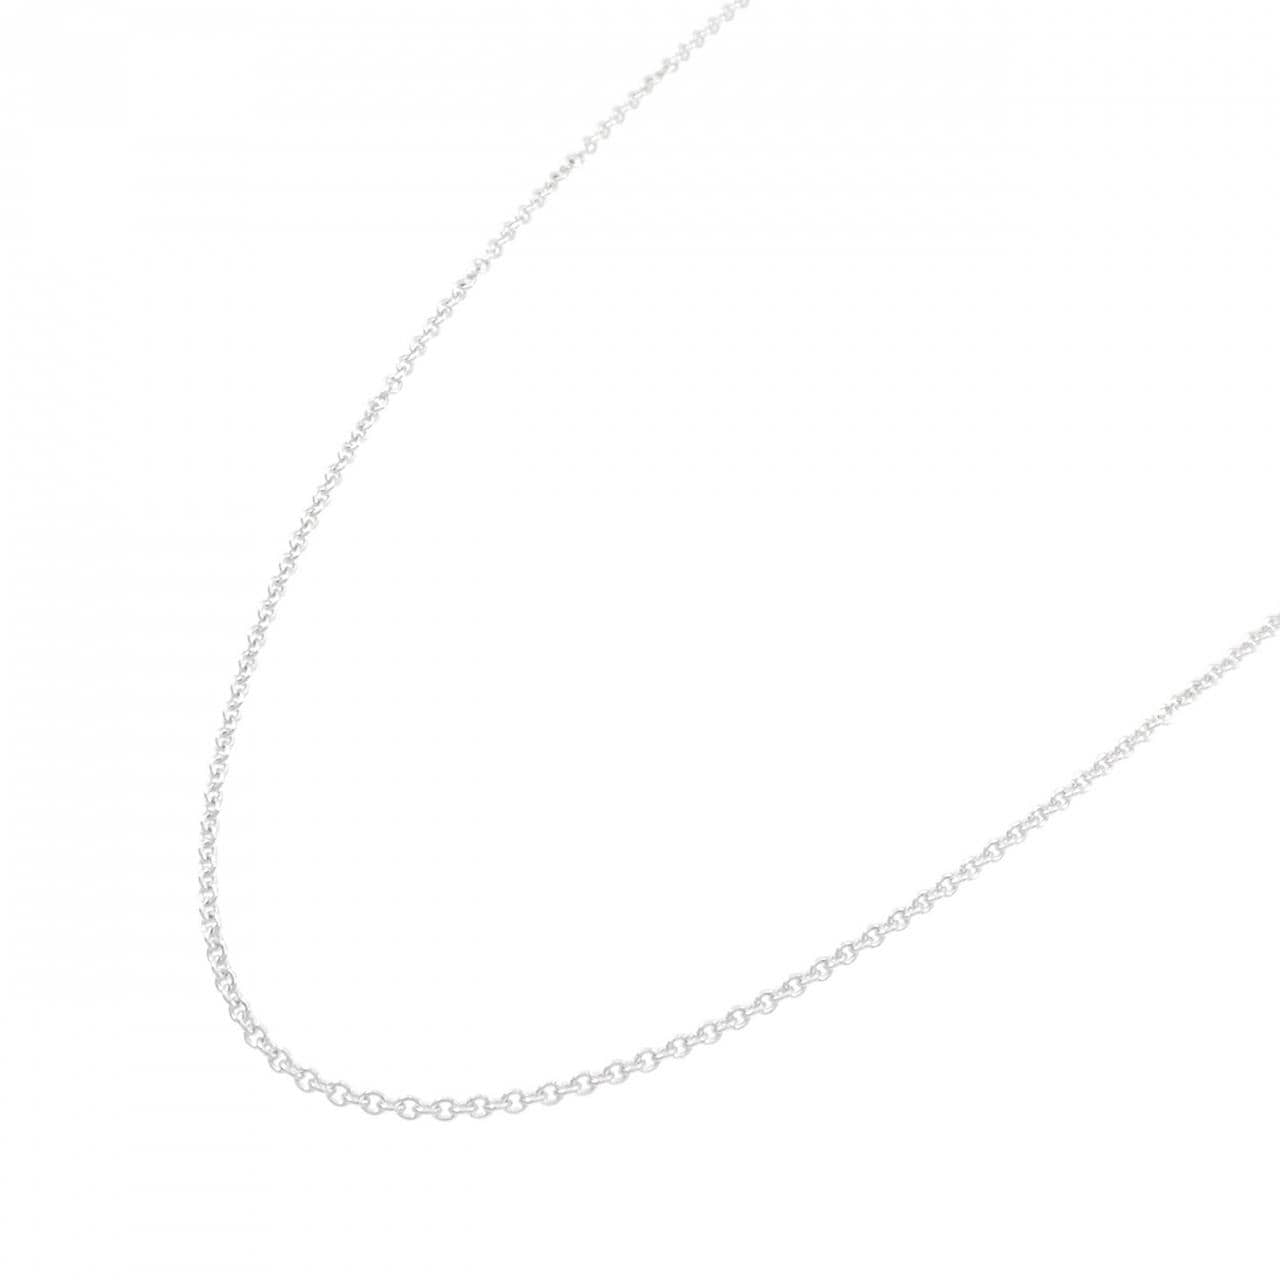 750WG chain necklace